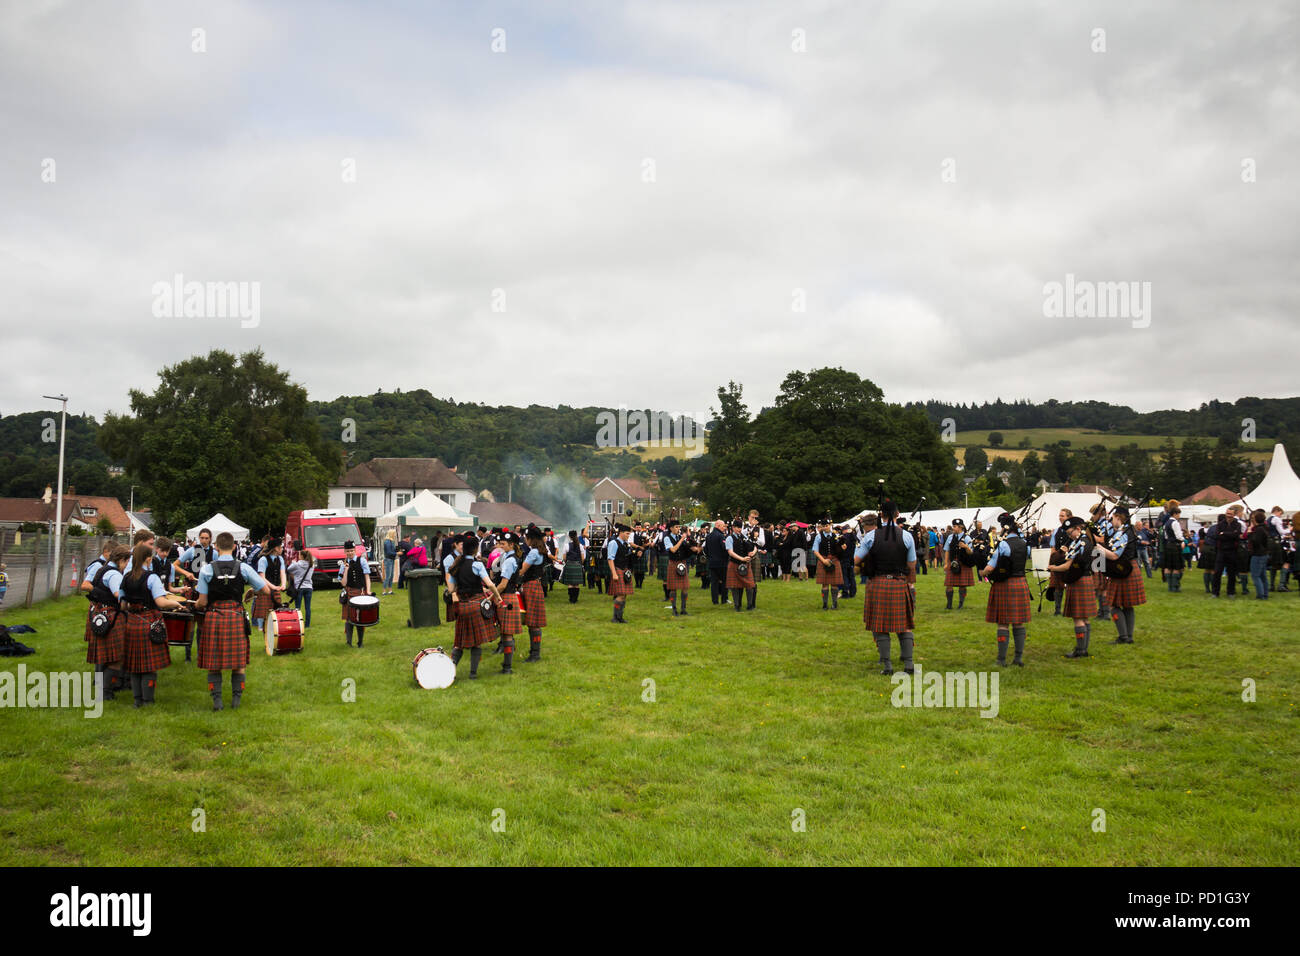 Stirling, Scotland, UK. 5th August 2018. Strathallan Games Park near Stirling is the venue for the 167th Bridge of Allan Highland Games.  Scottish pipe bands muster outside the main ring to tune their instruments and engage in a final practise, ready to compete in the pipe band competition. Credit Joseph Clemson, JY News Images/Alamy. Stock Photo